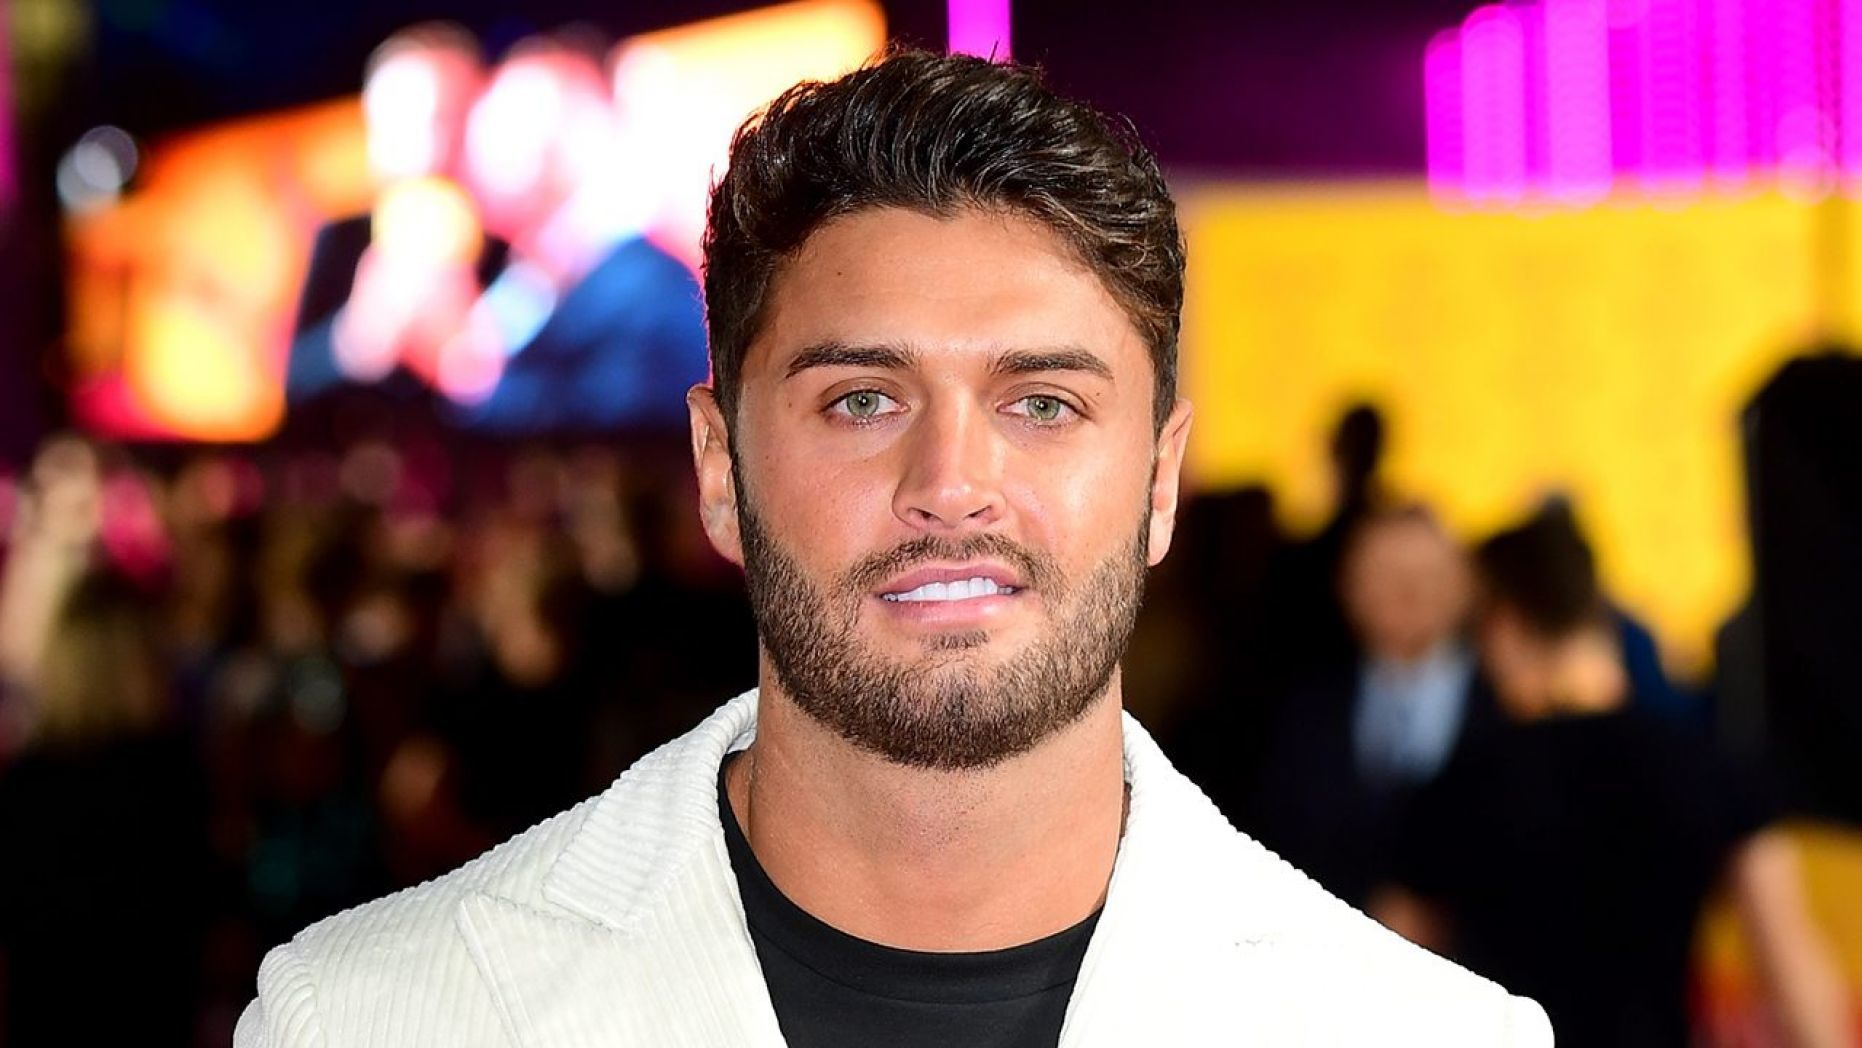 ‘Love Island’ star Mike Thalassitis dead at 26: reports